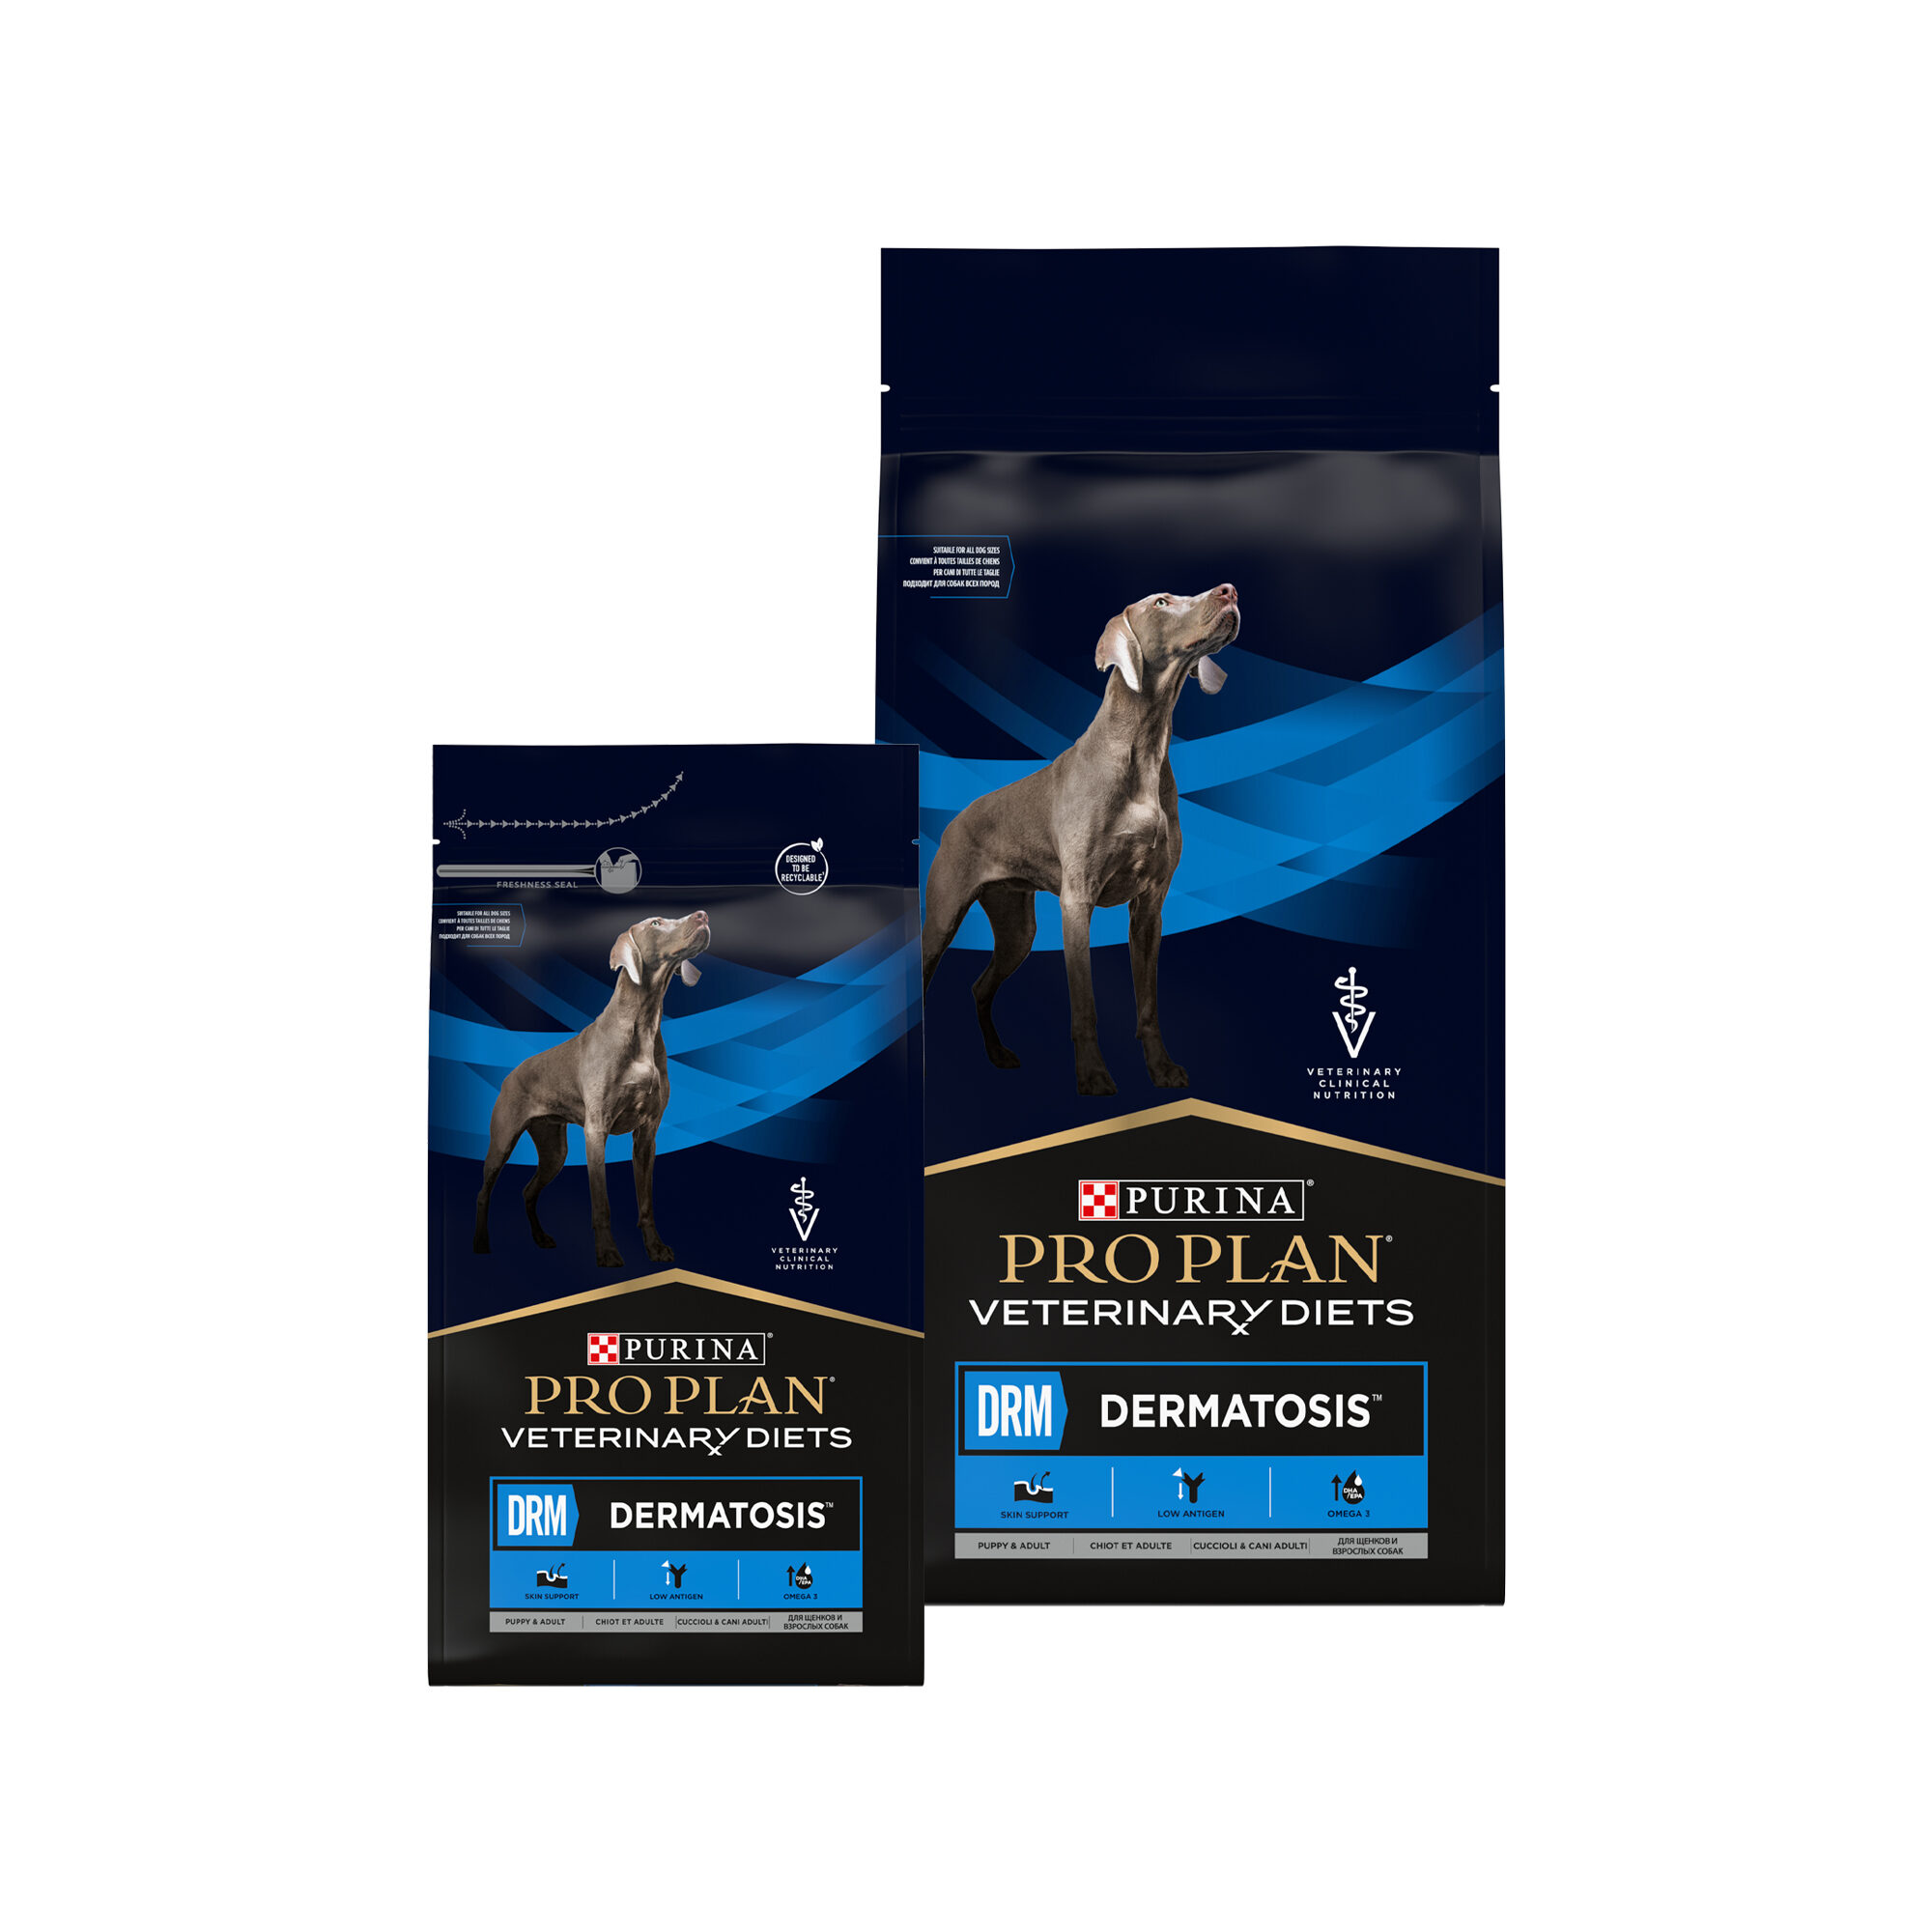 Purina Veterinary Diets - PRO PLAN Veterinary Diets CANINE DRM Dermatosis - 3 Kg